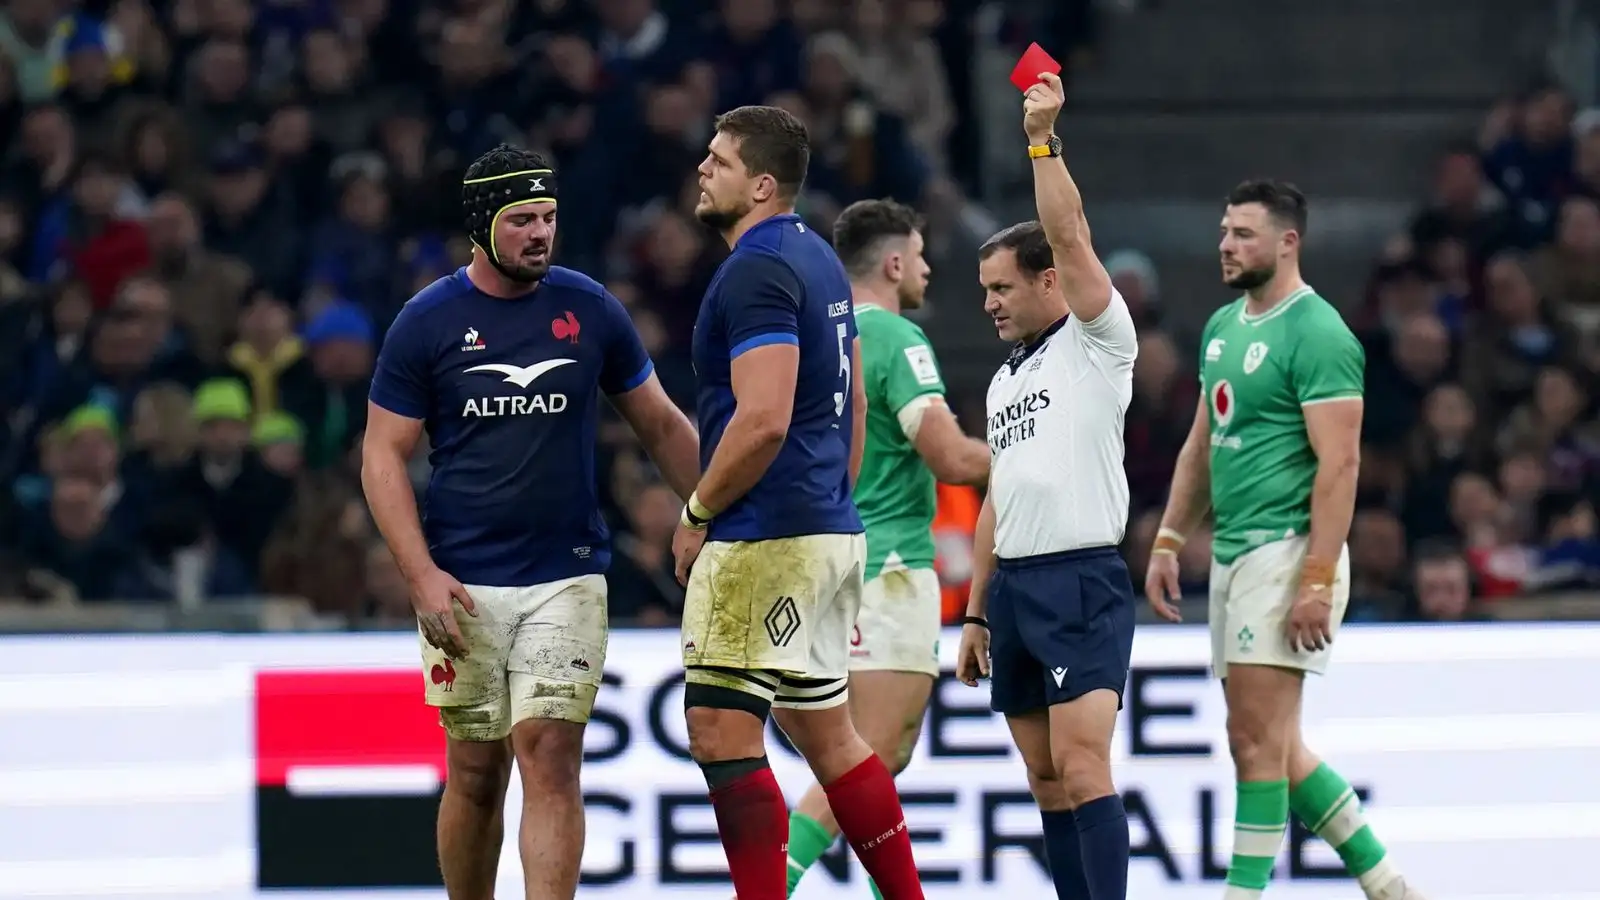 Paul Willemse, France vs Ireland. Six Nations